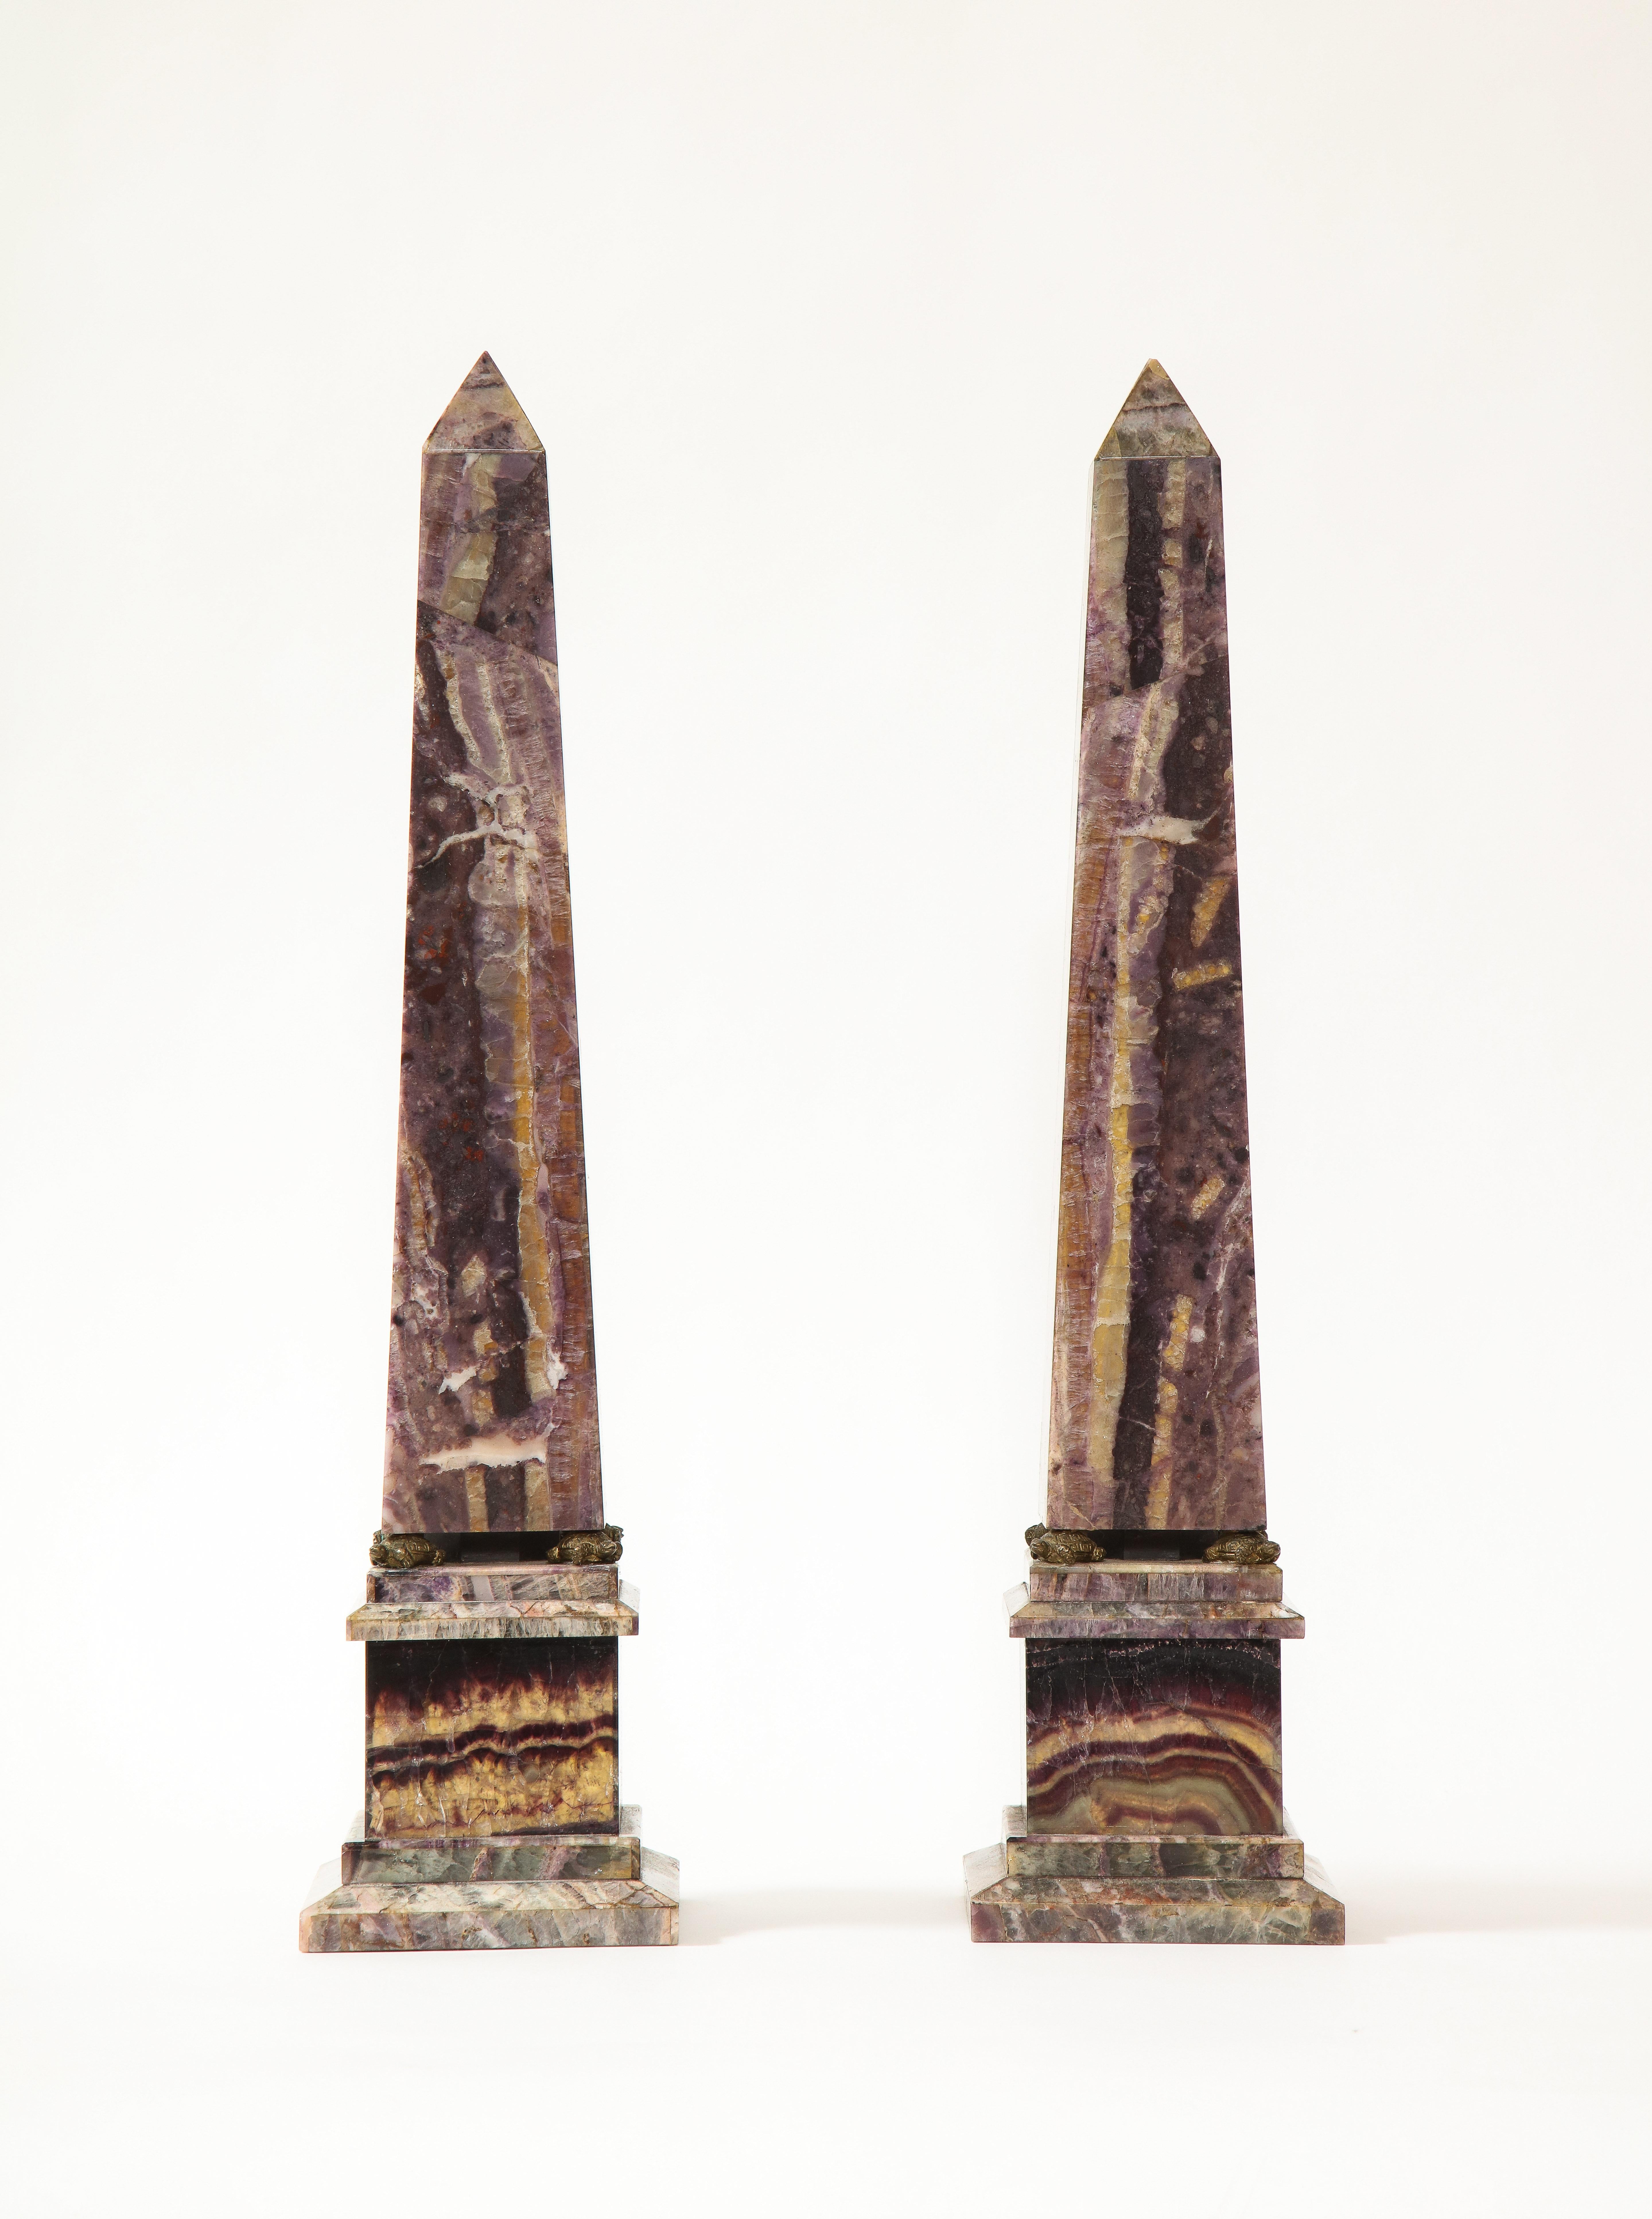 A fabulous and quite fine pair of 19th century Louis XVI style English turtle-form Ormolu Mounted Blue John (Fluorspar) Obelisks. Each obelisk is finely hand-carved with the finest quality English blue john and mounted on a square plinth. Between